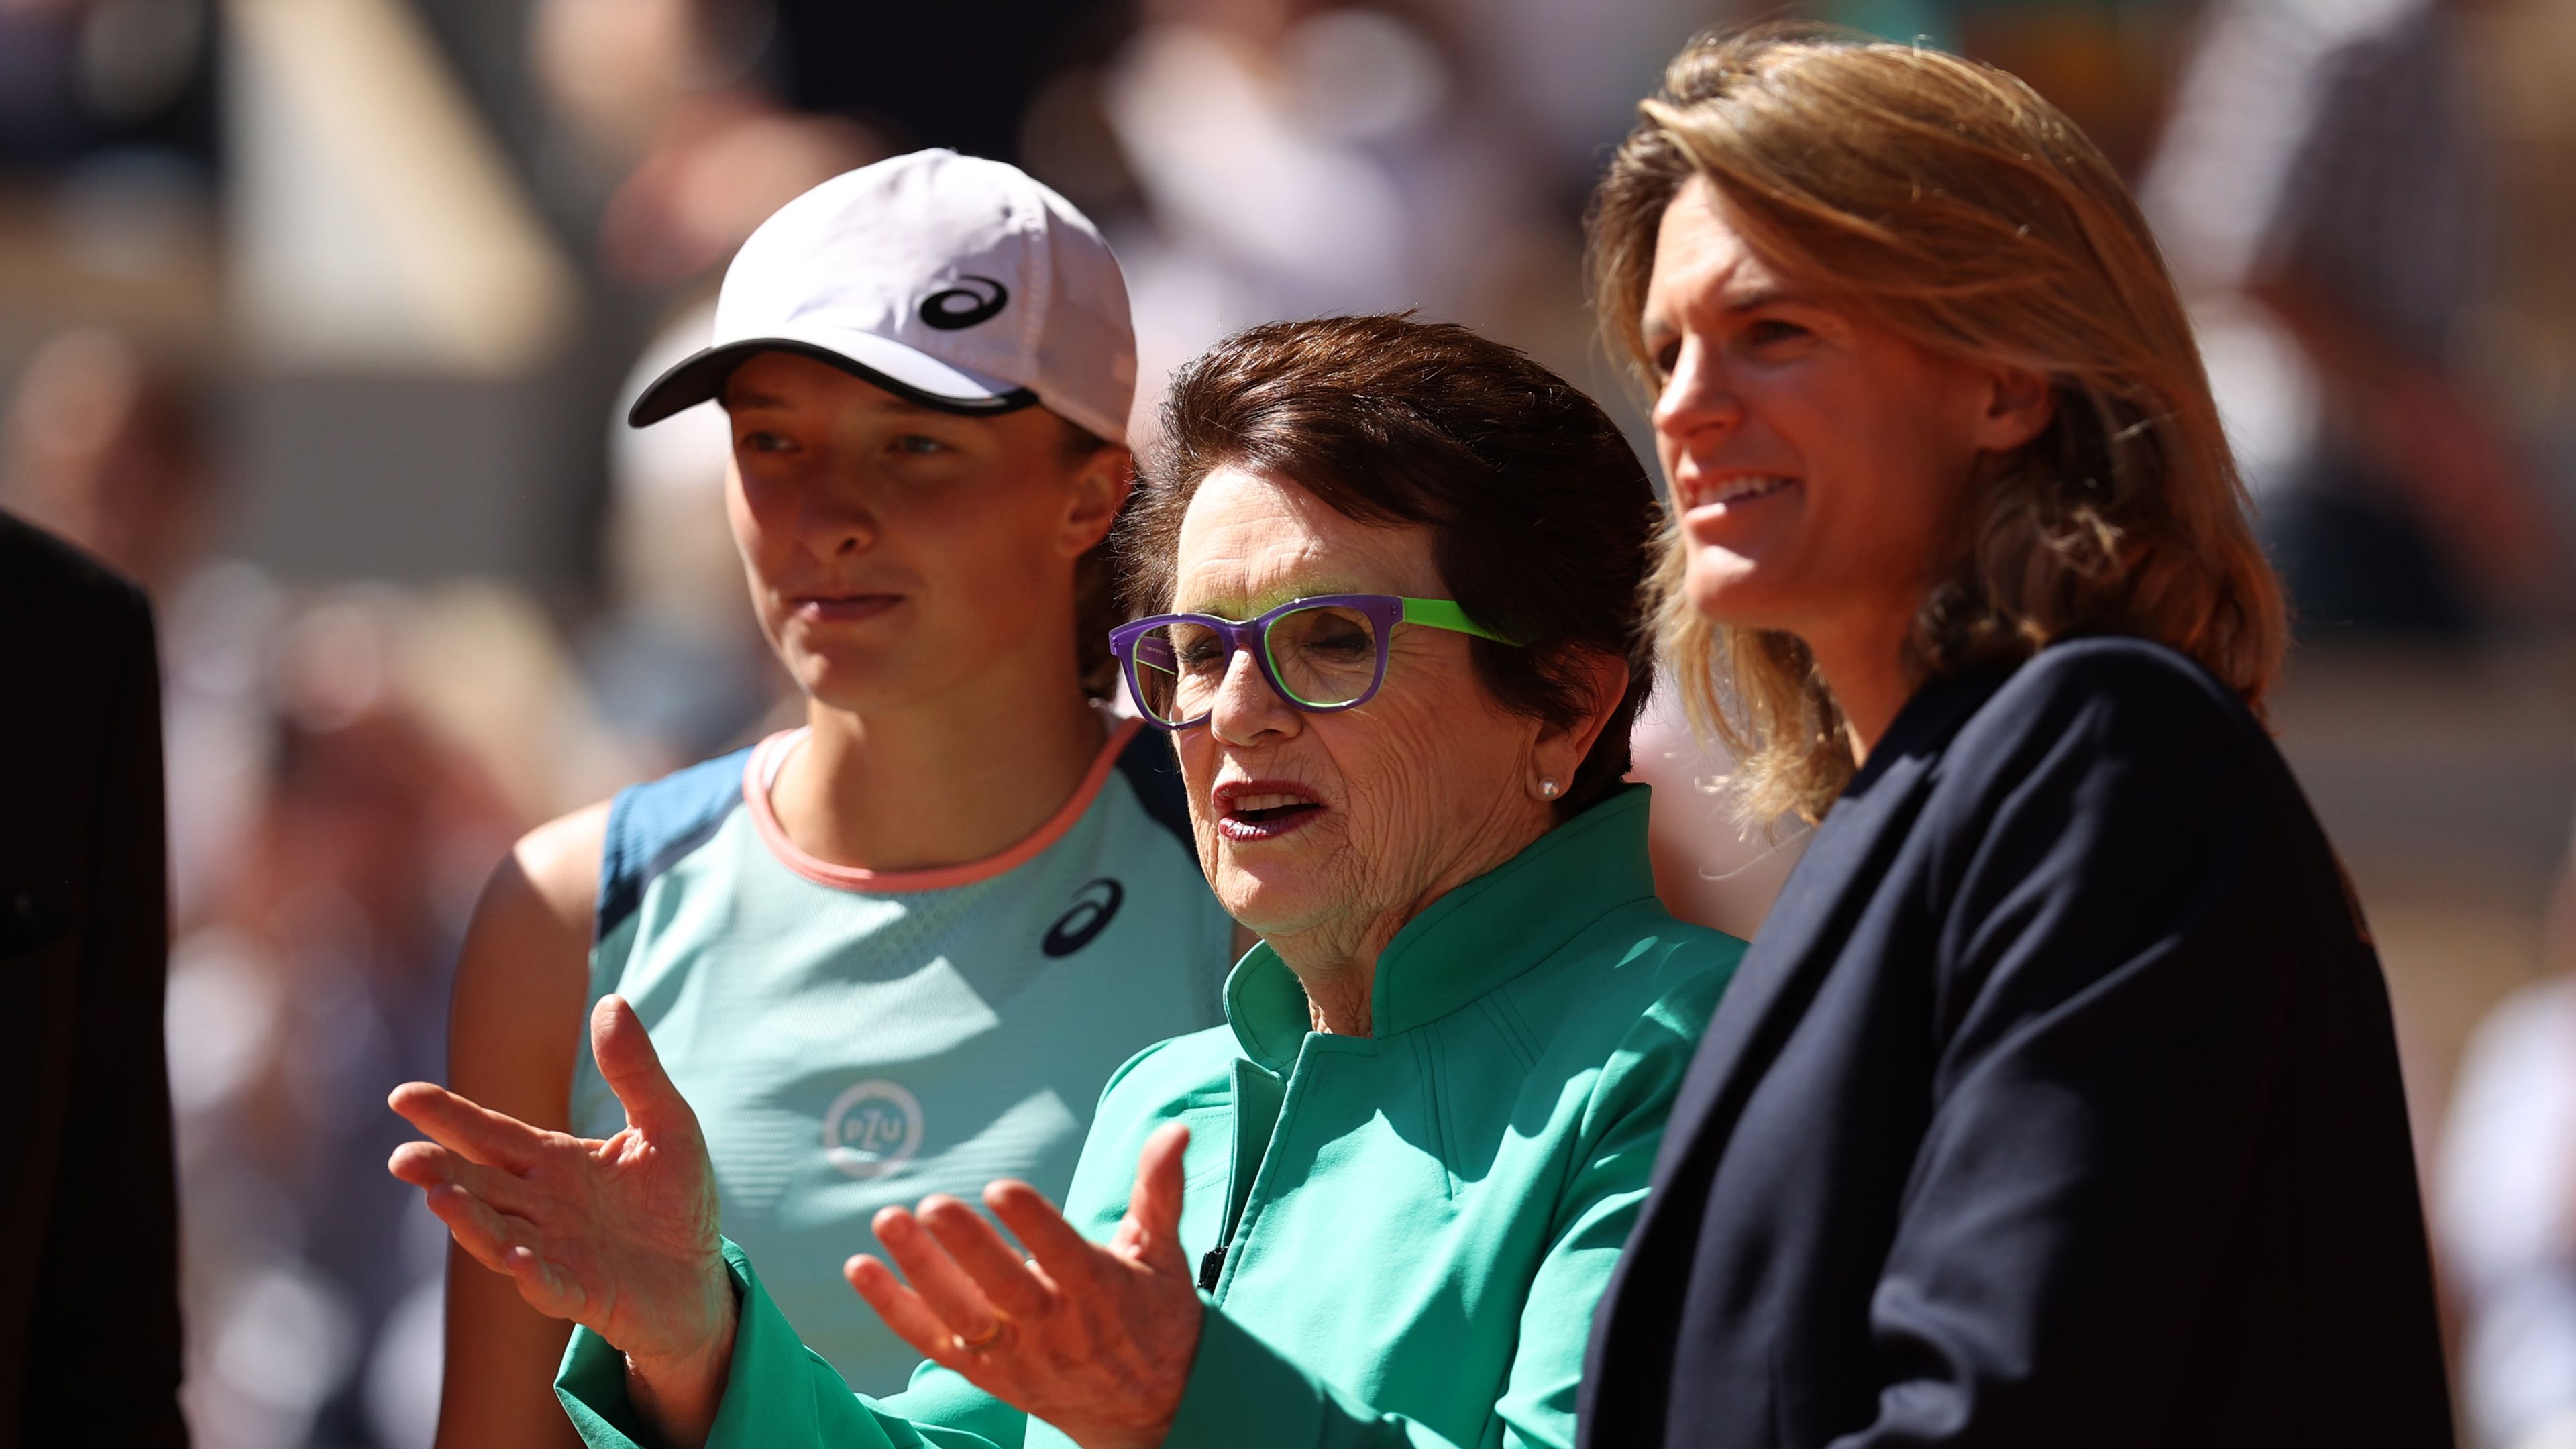 Roland-Garros director Amelie Mauresmo apologises for 'less appealing' women's tennis comments